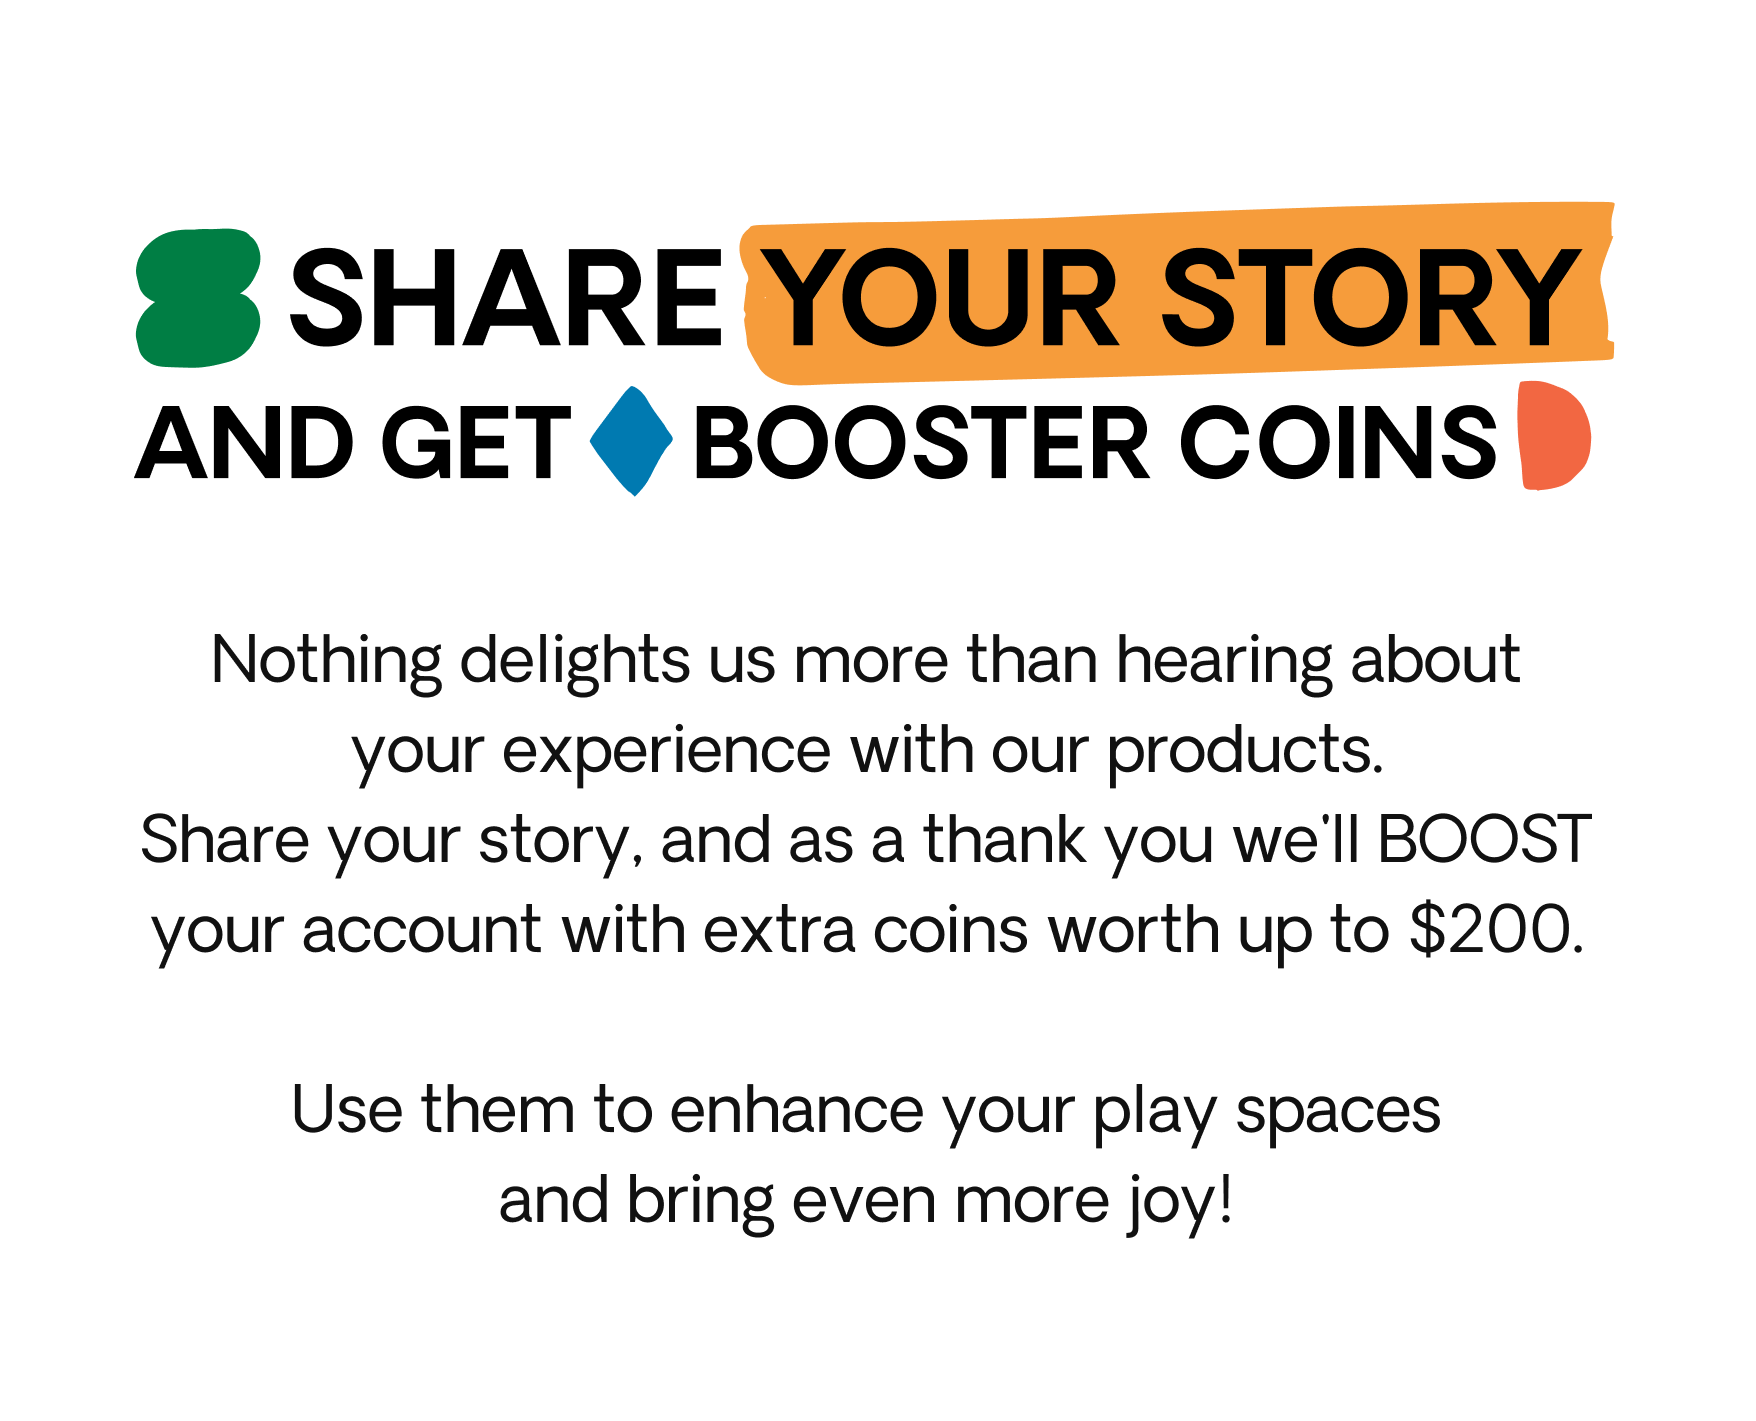 Share your story to get extra coins.